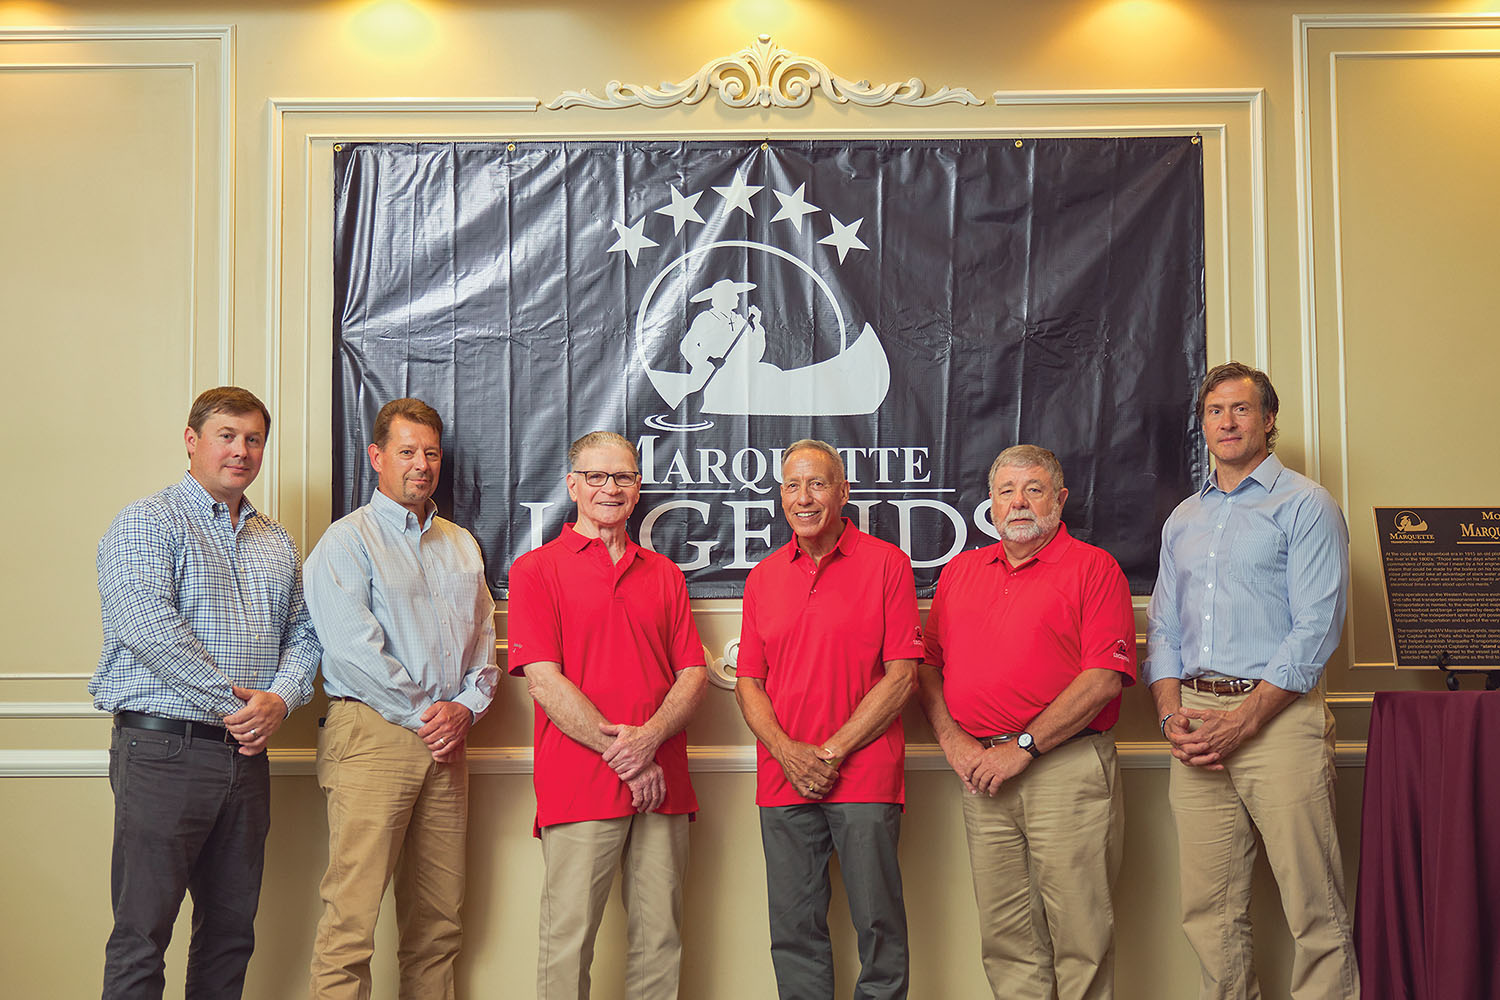 The 2022 class of Marquette Legends includes (in red shirts, from left): Capt. John Zeringue, Capt. Emile Dufrene and Capt. Dennis Drury. With them, from left, are Damon Judd, president and CEO of Marquette Transportation; Darin Adrian, executive vice president, river division; and Chris Myskowski, senior vice president of operations, river division. (Photo courtesy of Brad Rankin Studio)